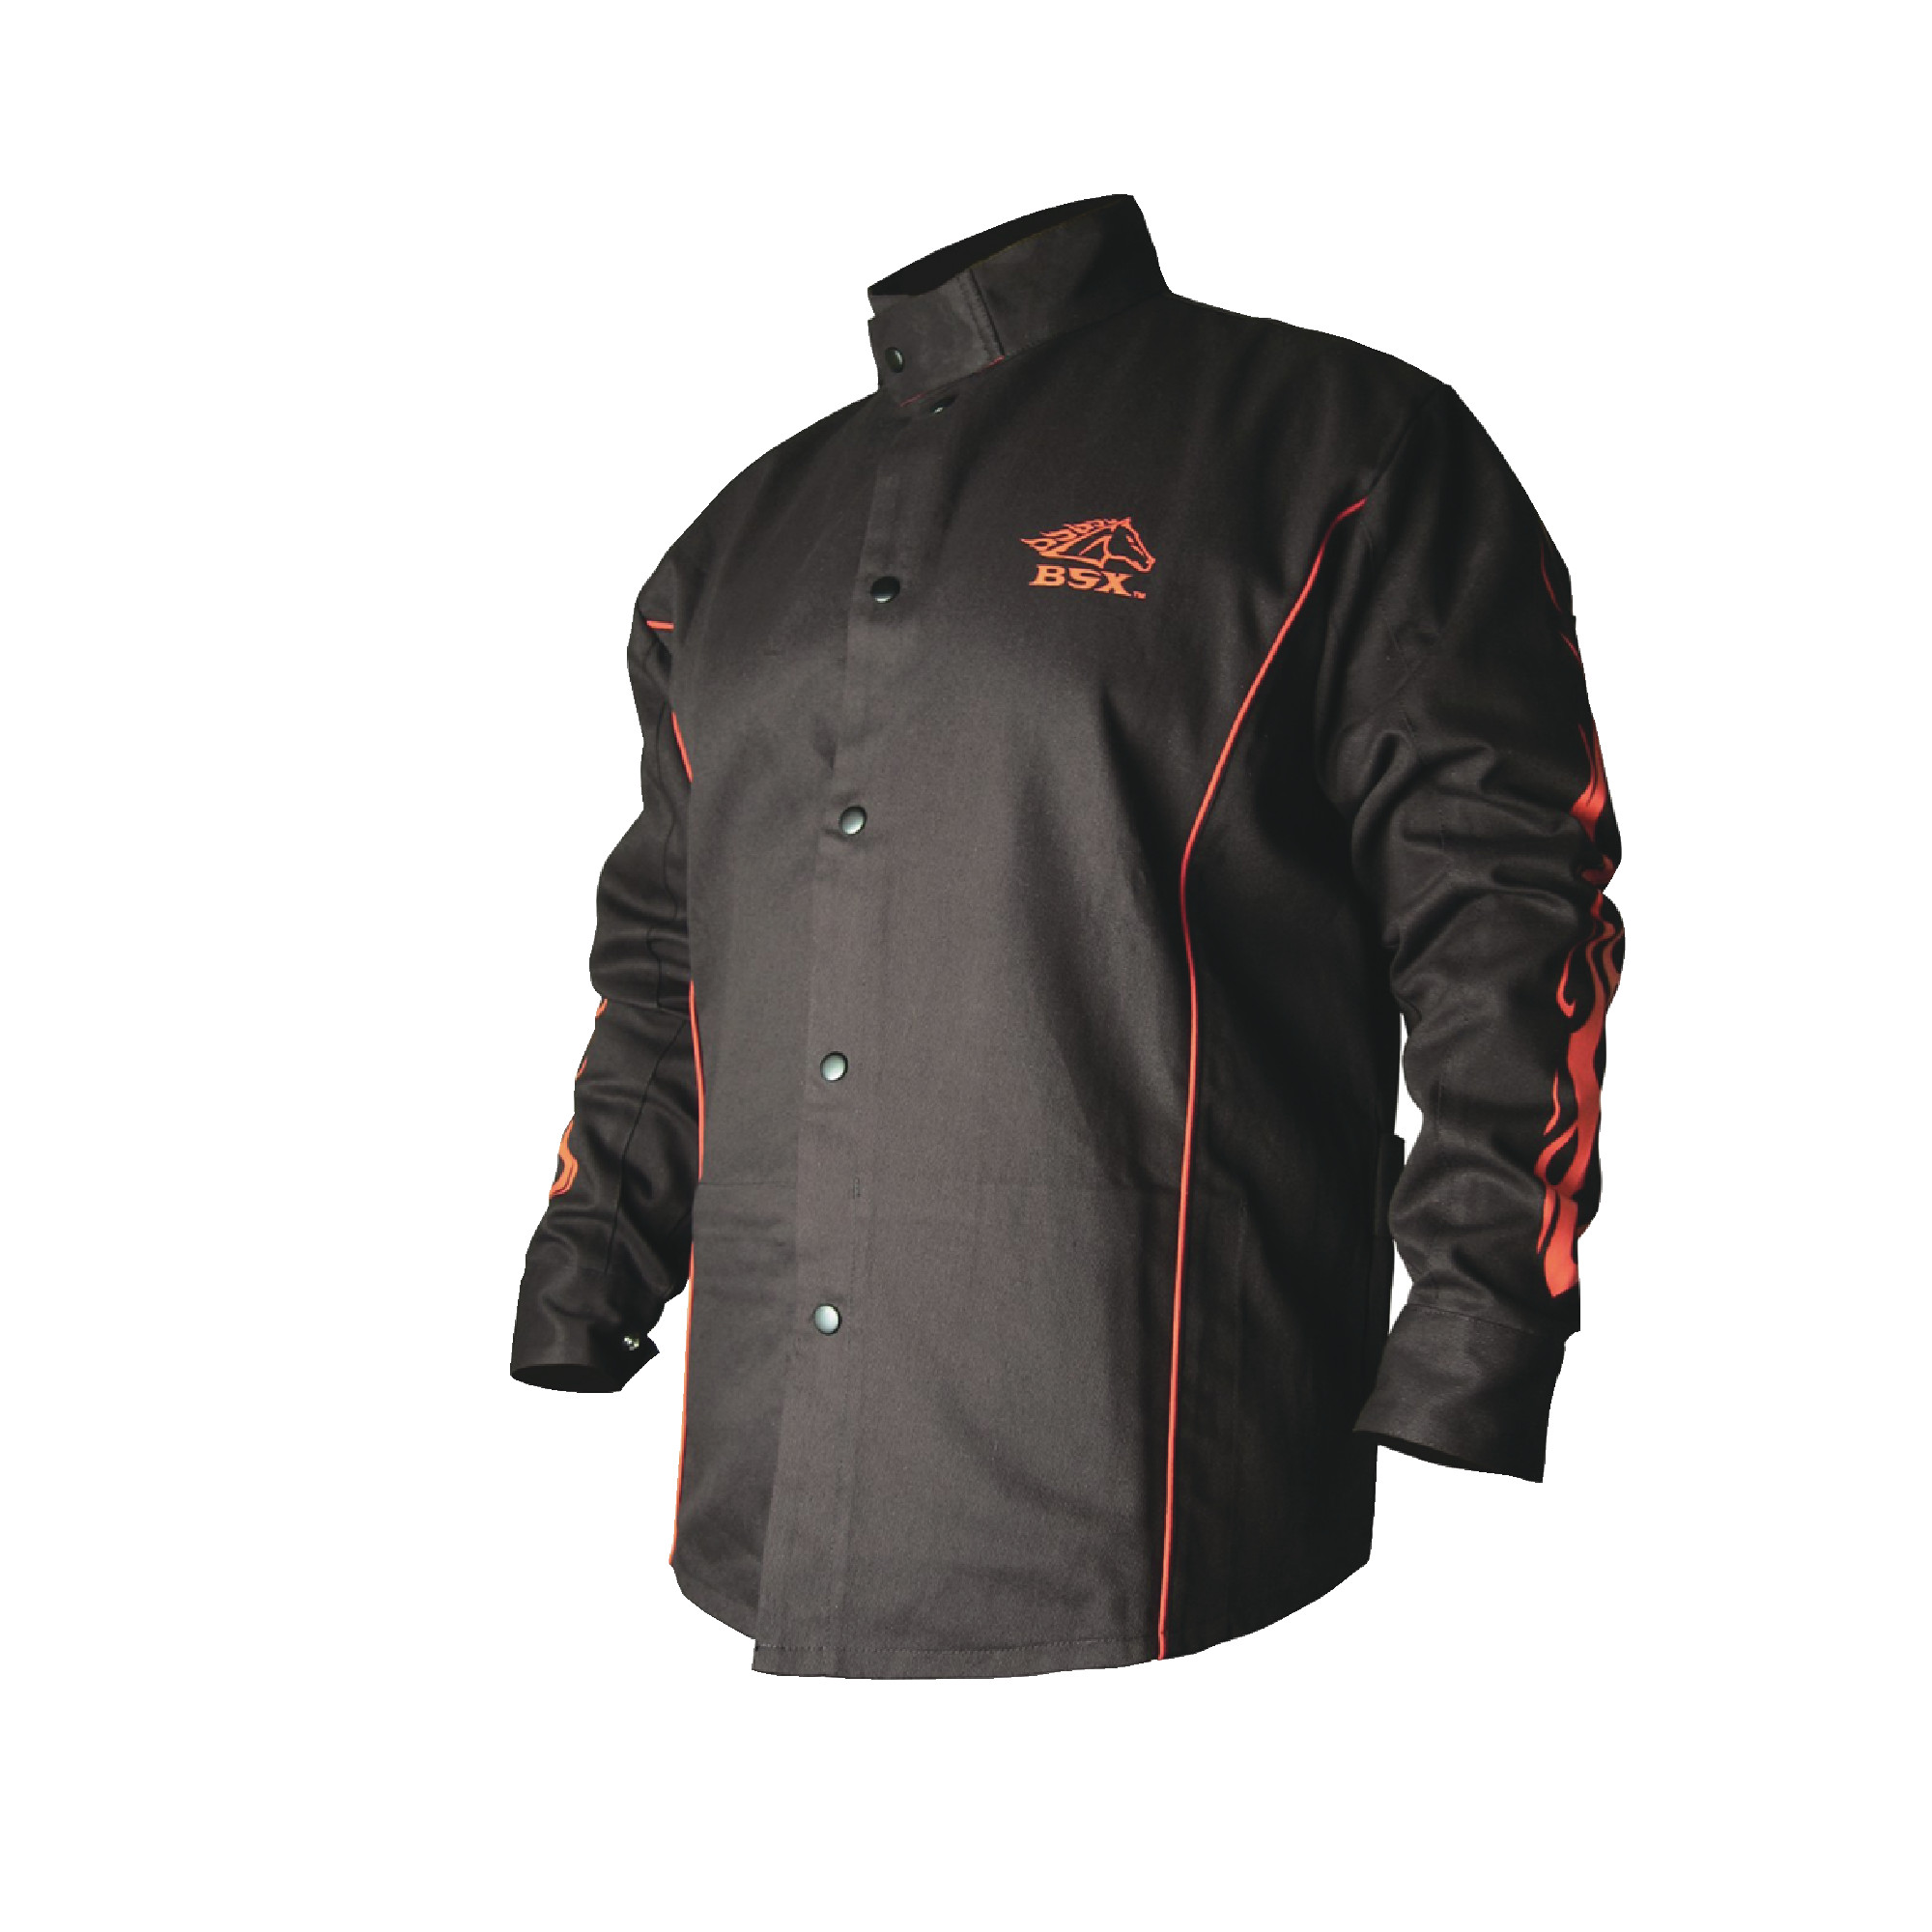 BSX Stryker Black With Red Flames Fire Resistant Welding Jacket - Size XXXL